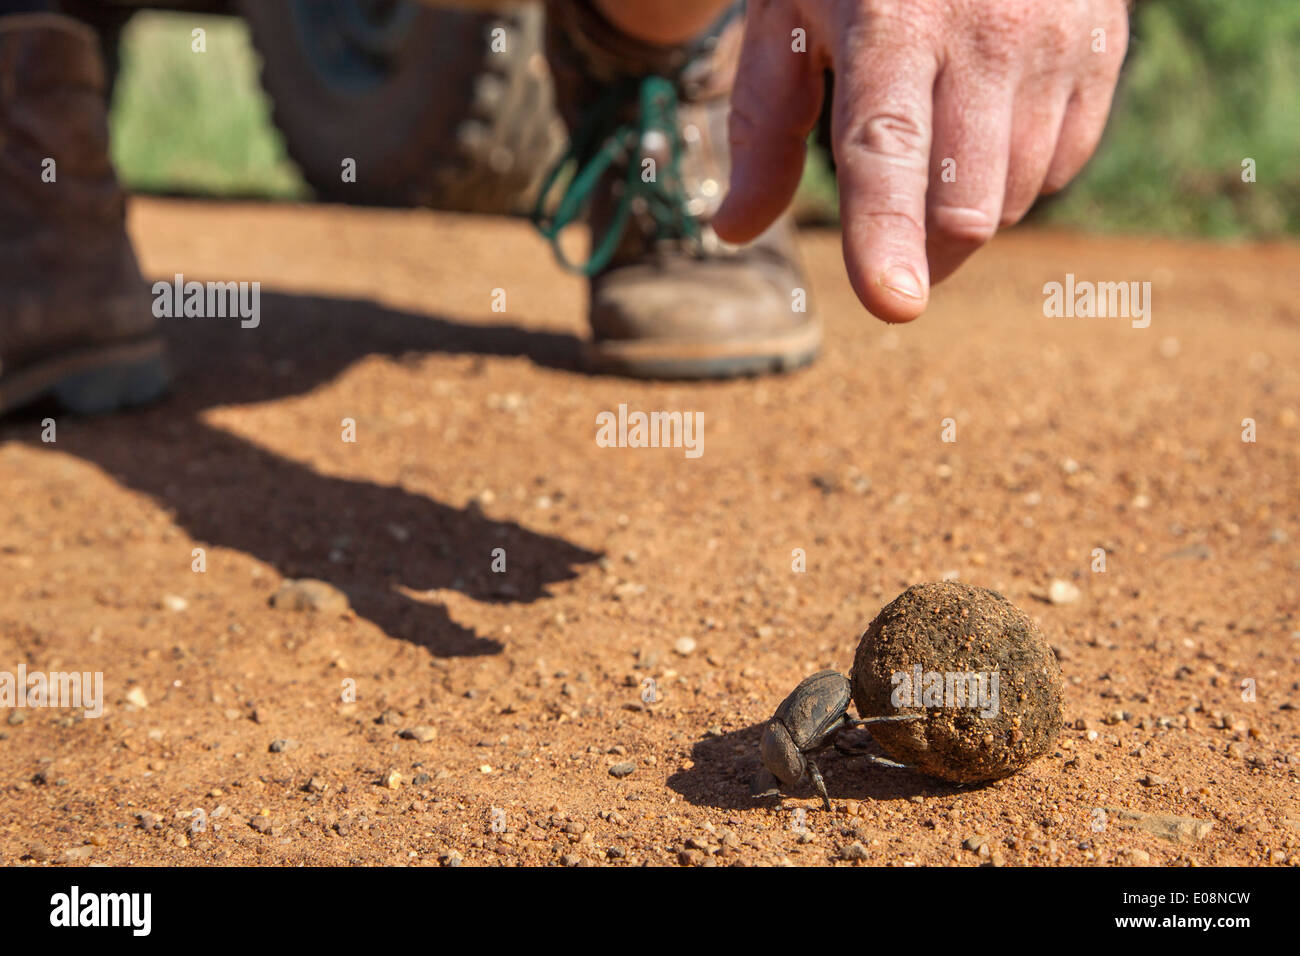 Safari guide pointing out dung beetle (Scarabaeidae) with dung ball, Madikwe game reserve, South Africa, February, 2014 Stock Photo